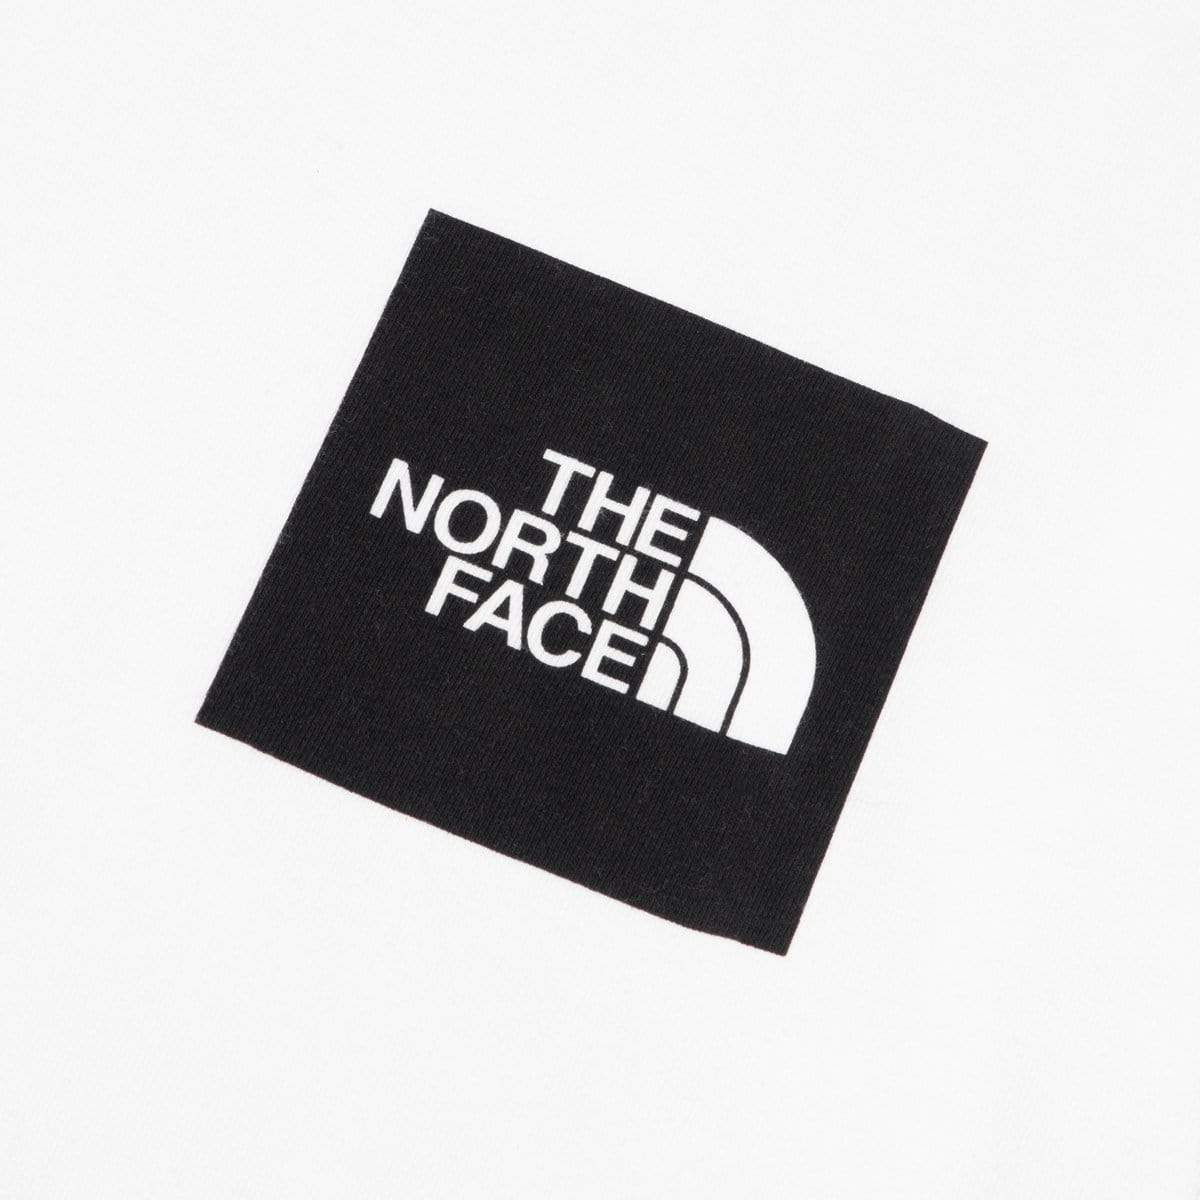 The North Face Black Series T-Shirts FINE S/S TEE